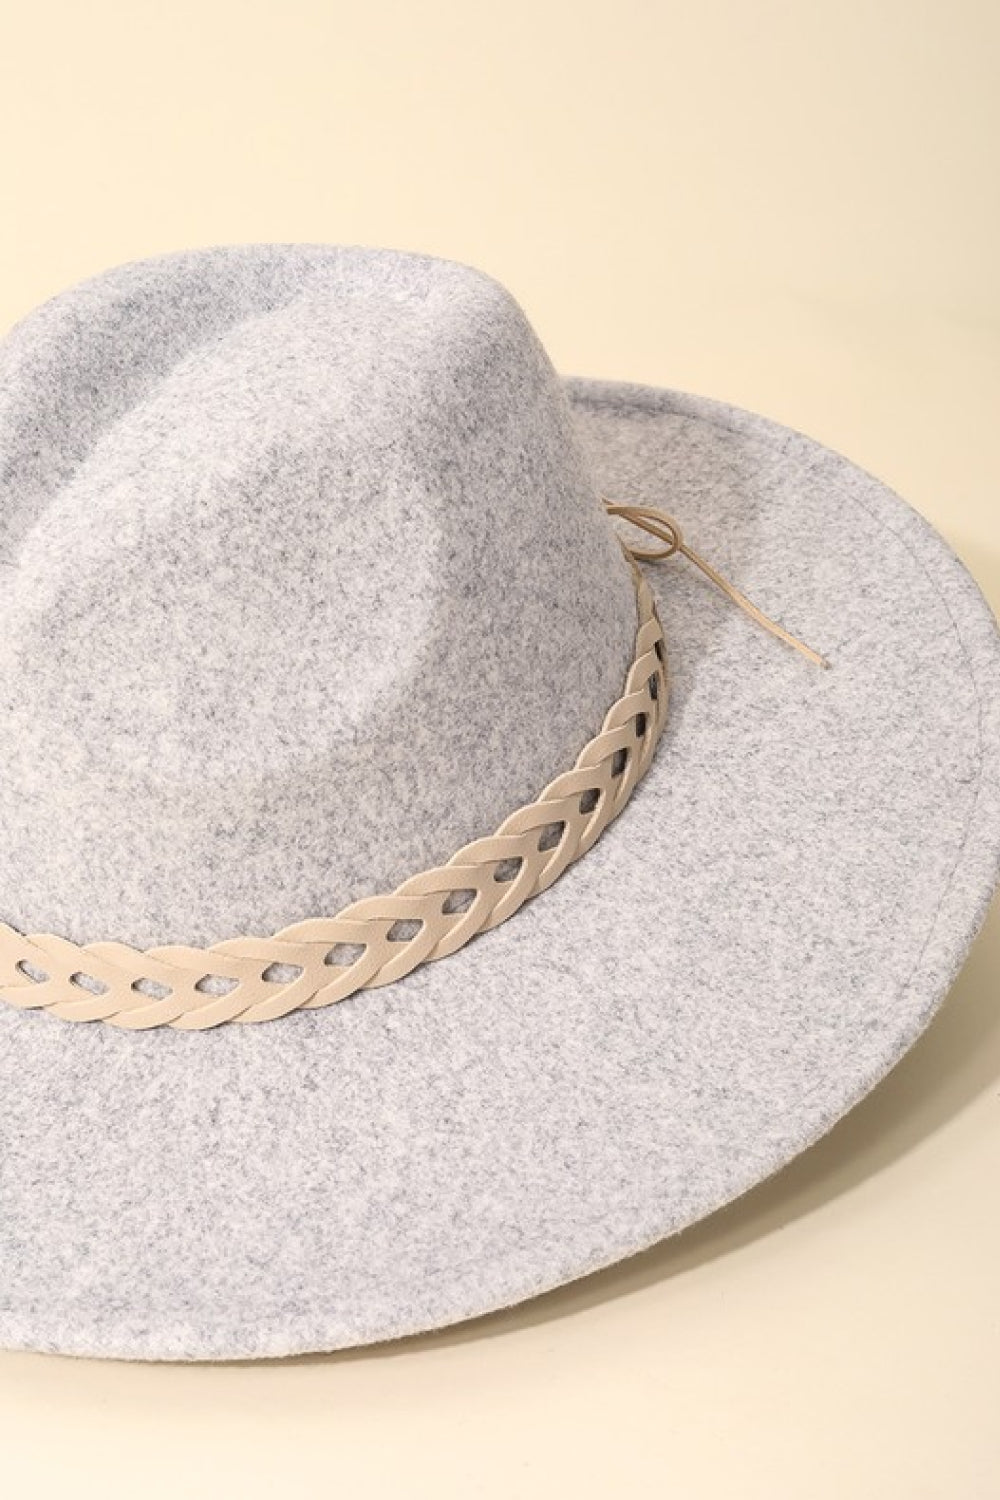 Fame Woven Together Braided Strap Fedora - Guy Christopher